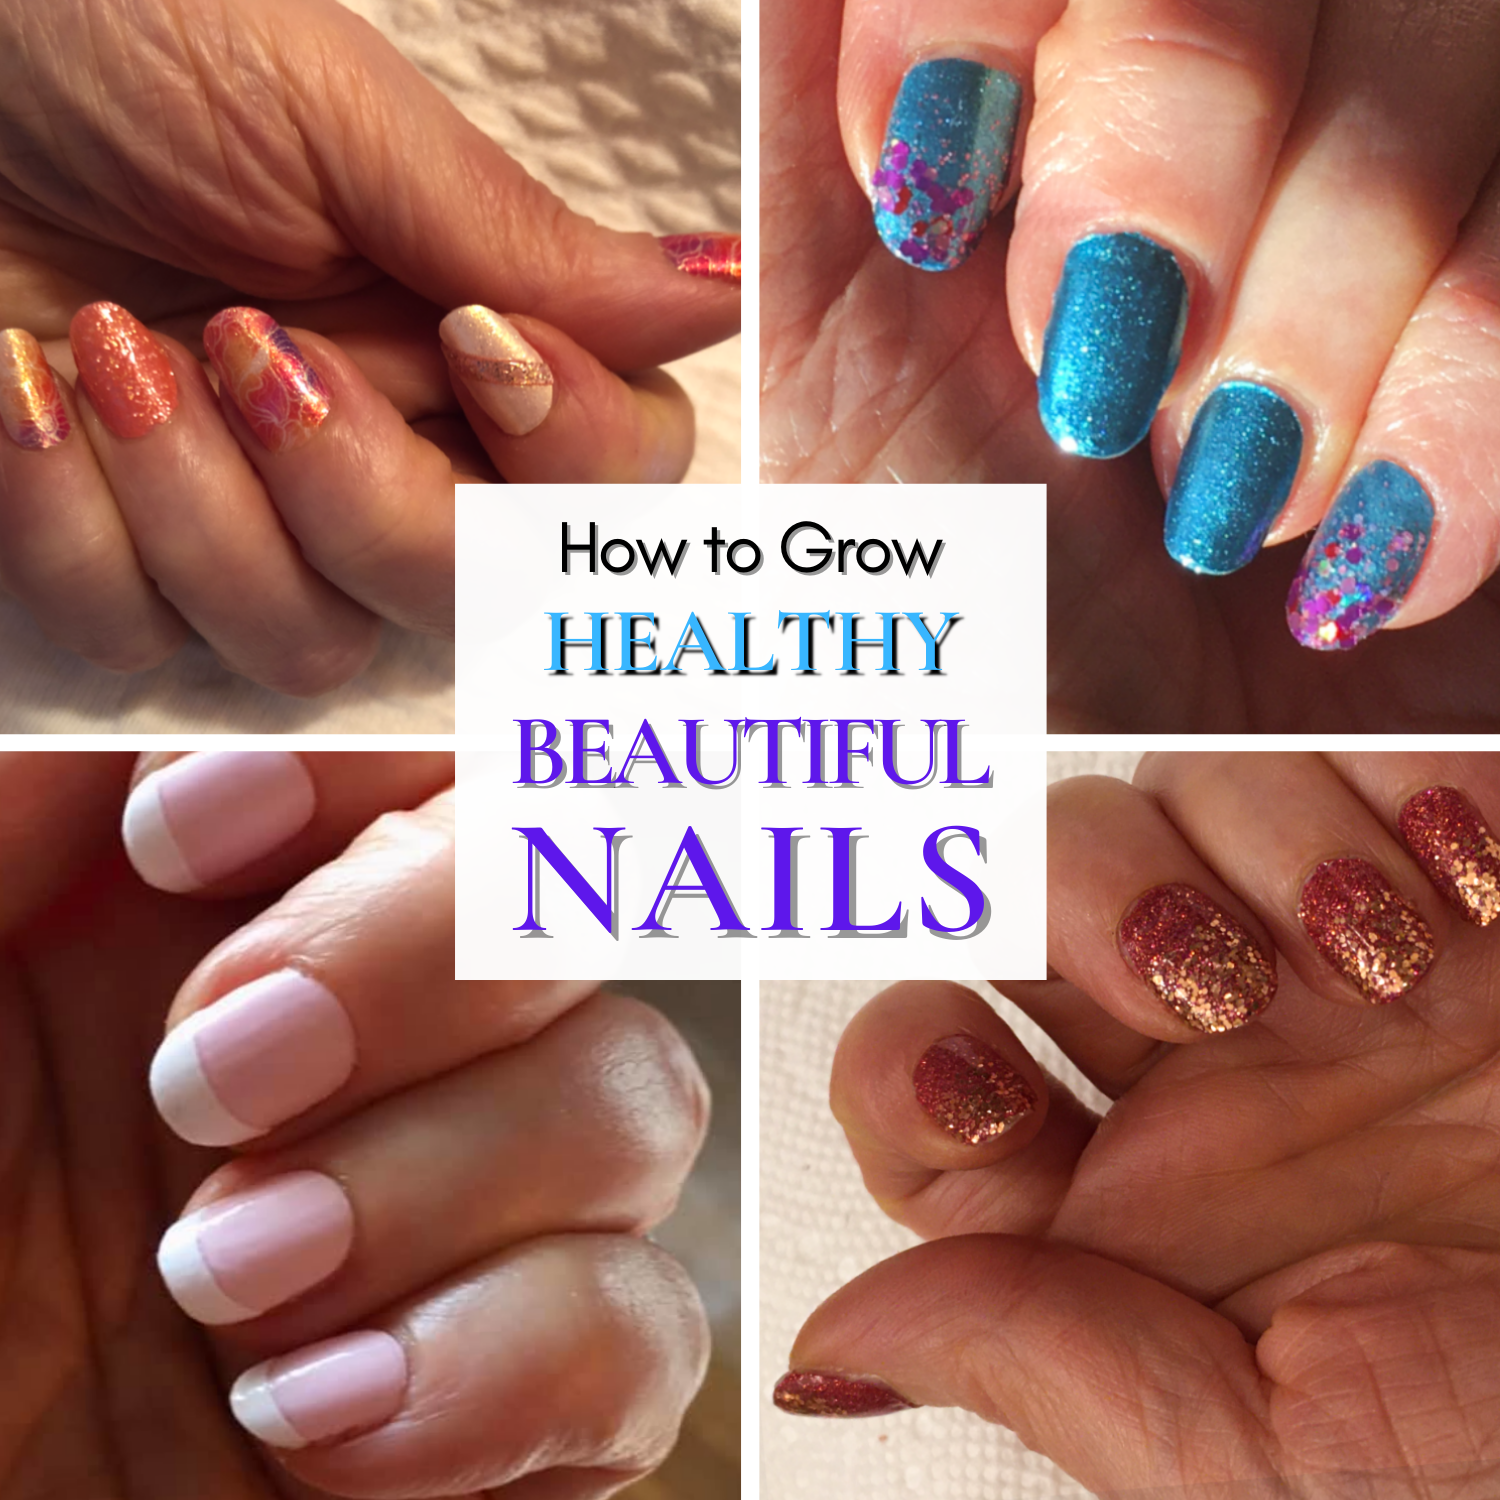 The secret to healthy nails? 💅 - Mylee